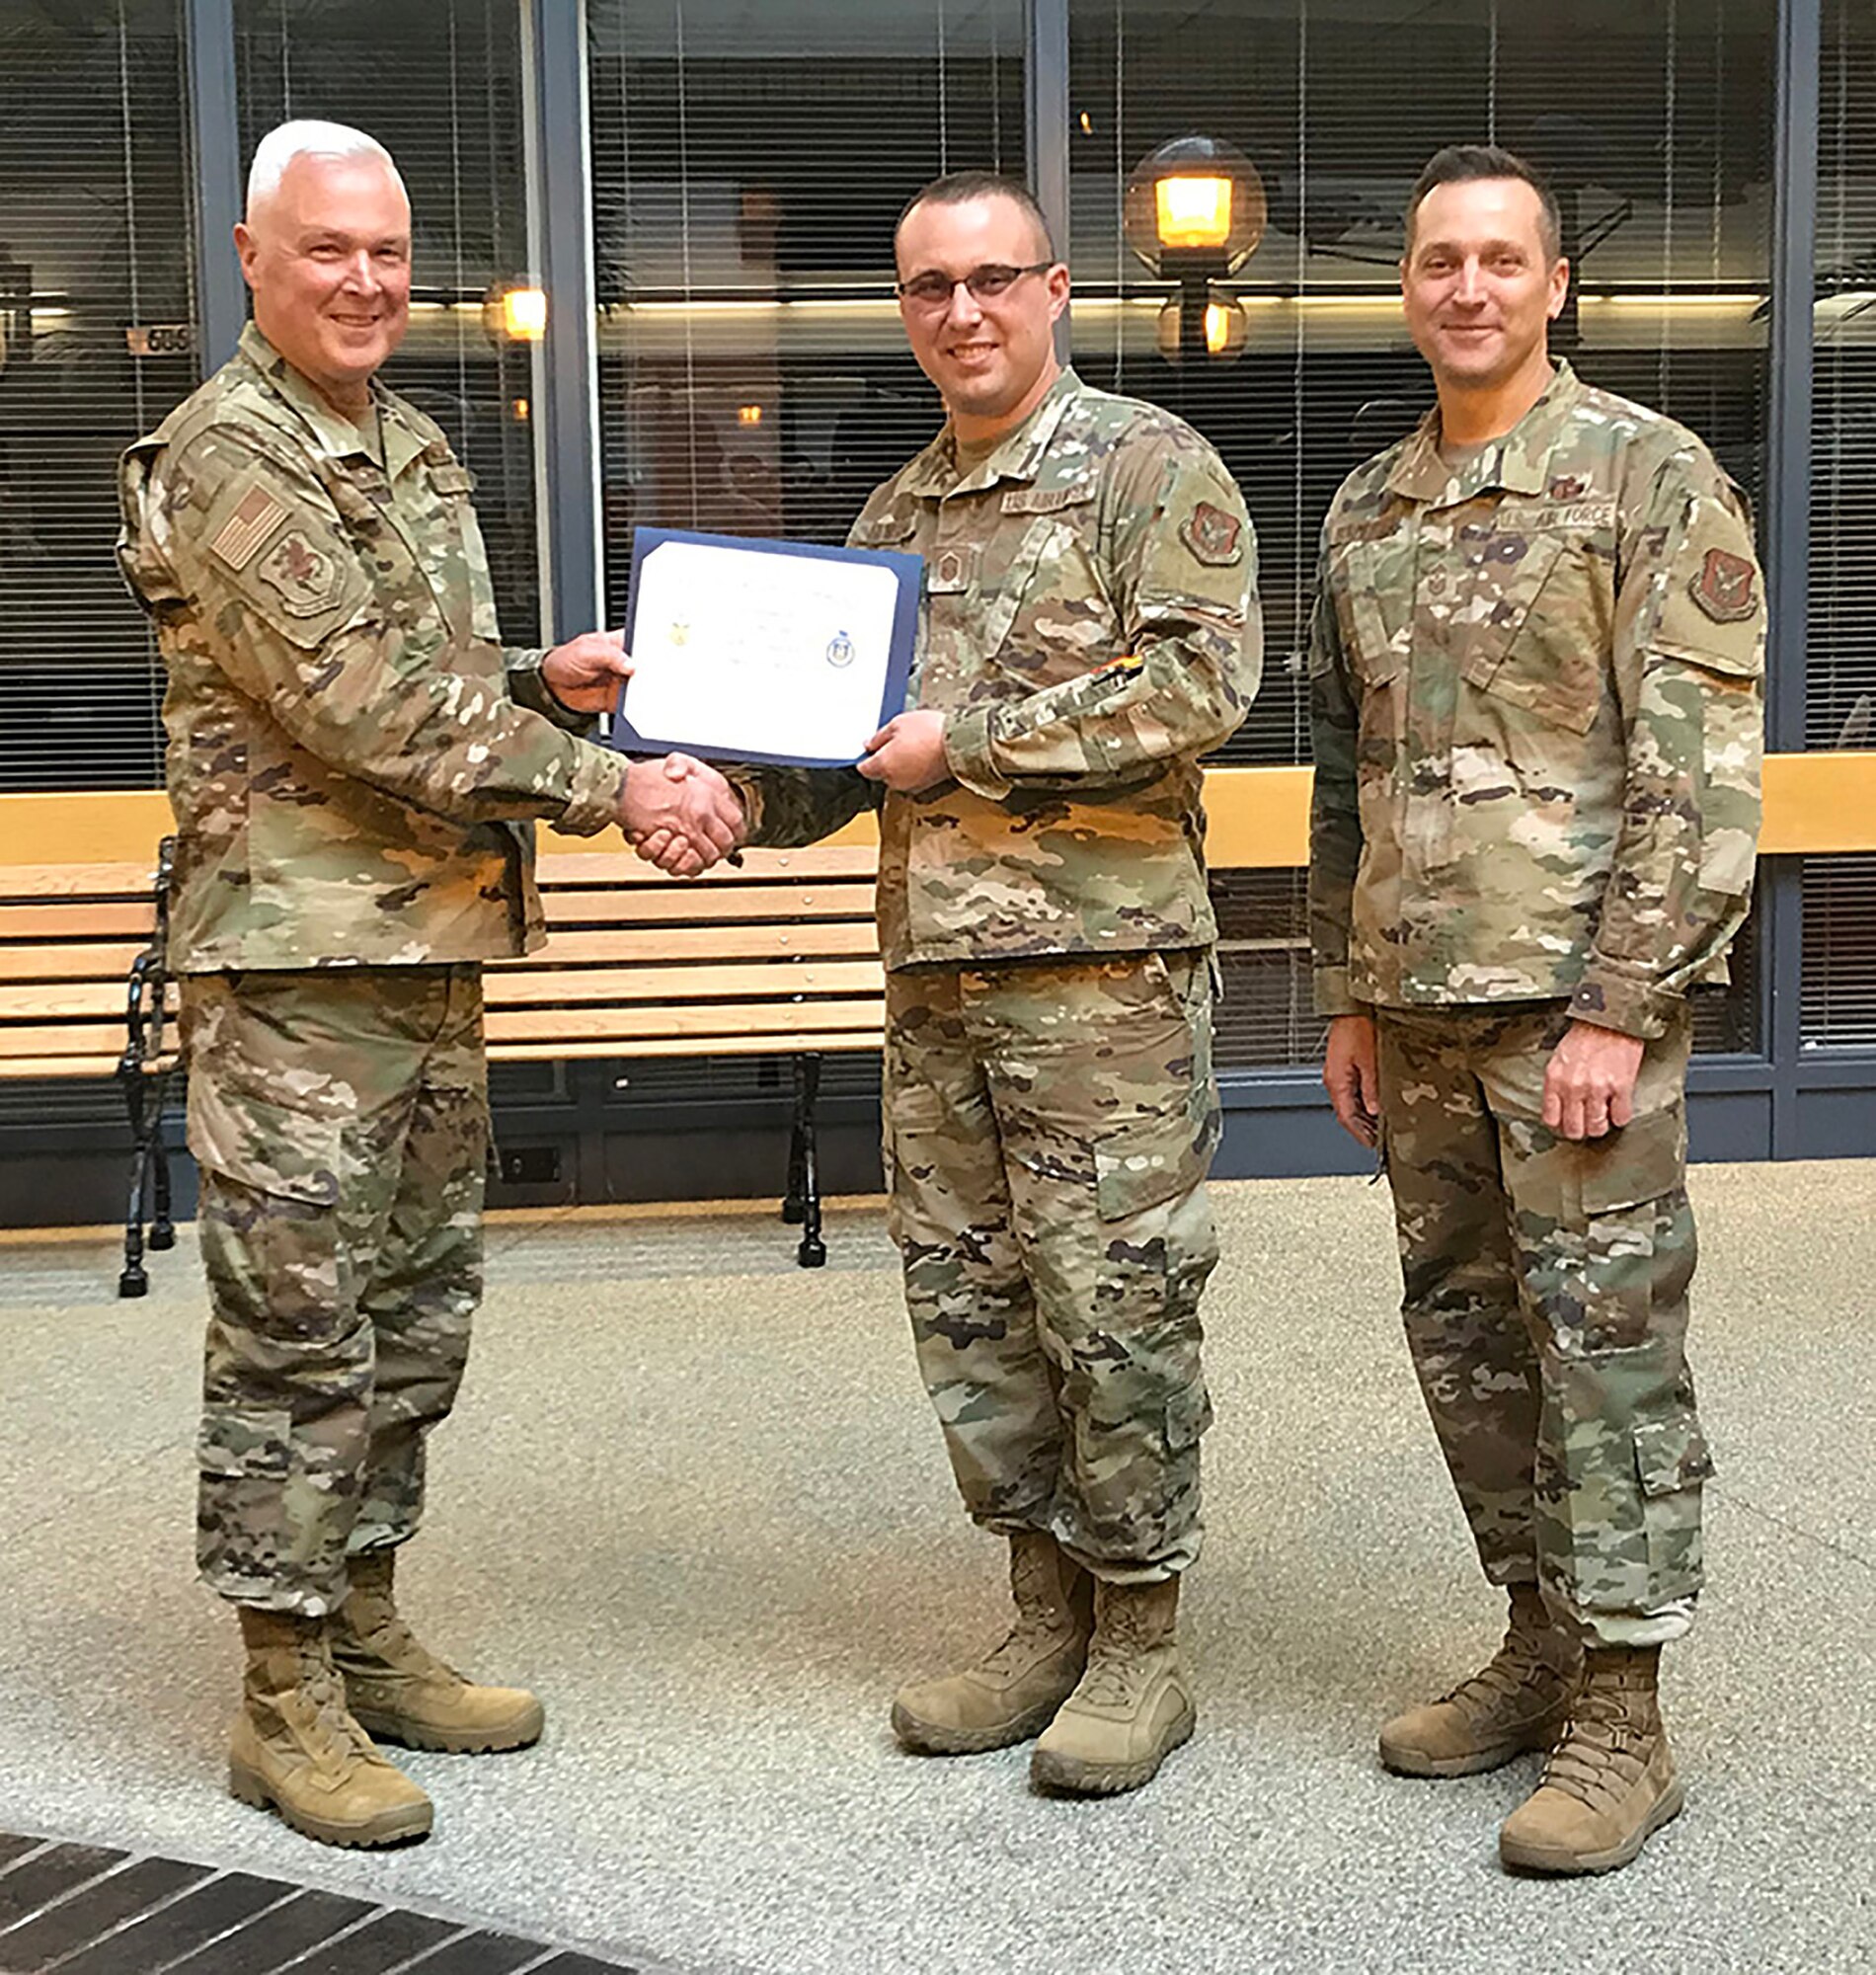 Col. Scott McLaughlin, 349th Air Mobility Wing Commander, and 349th AMW Command Chief, Chief Master Sgt. Jimmy Burmeister, took the opportunity this past UTA to reach out and give a special "thank you" to all the Unit Effectiveness Inspection Superior Performers.